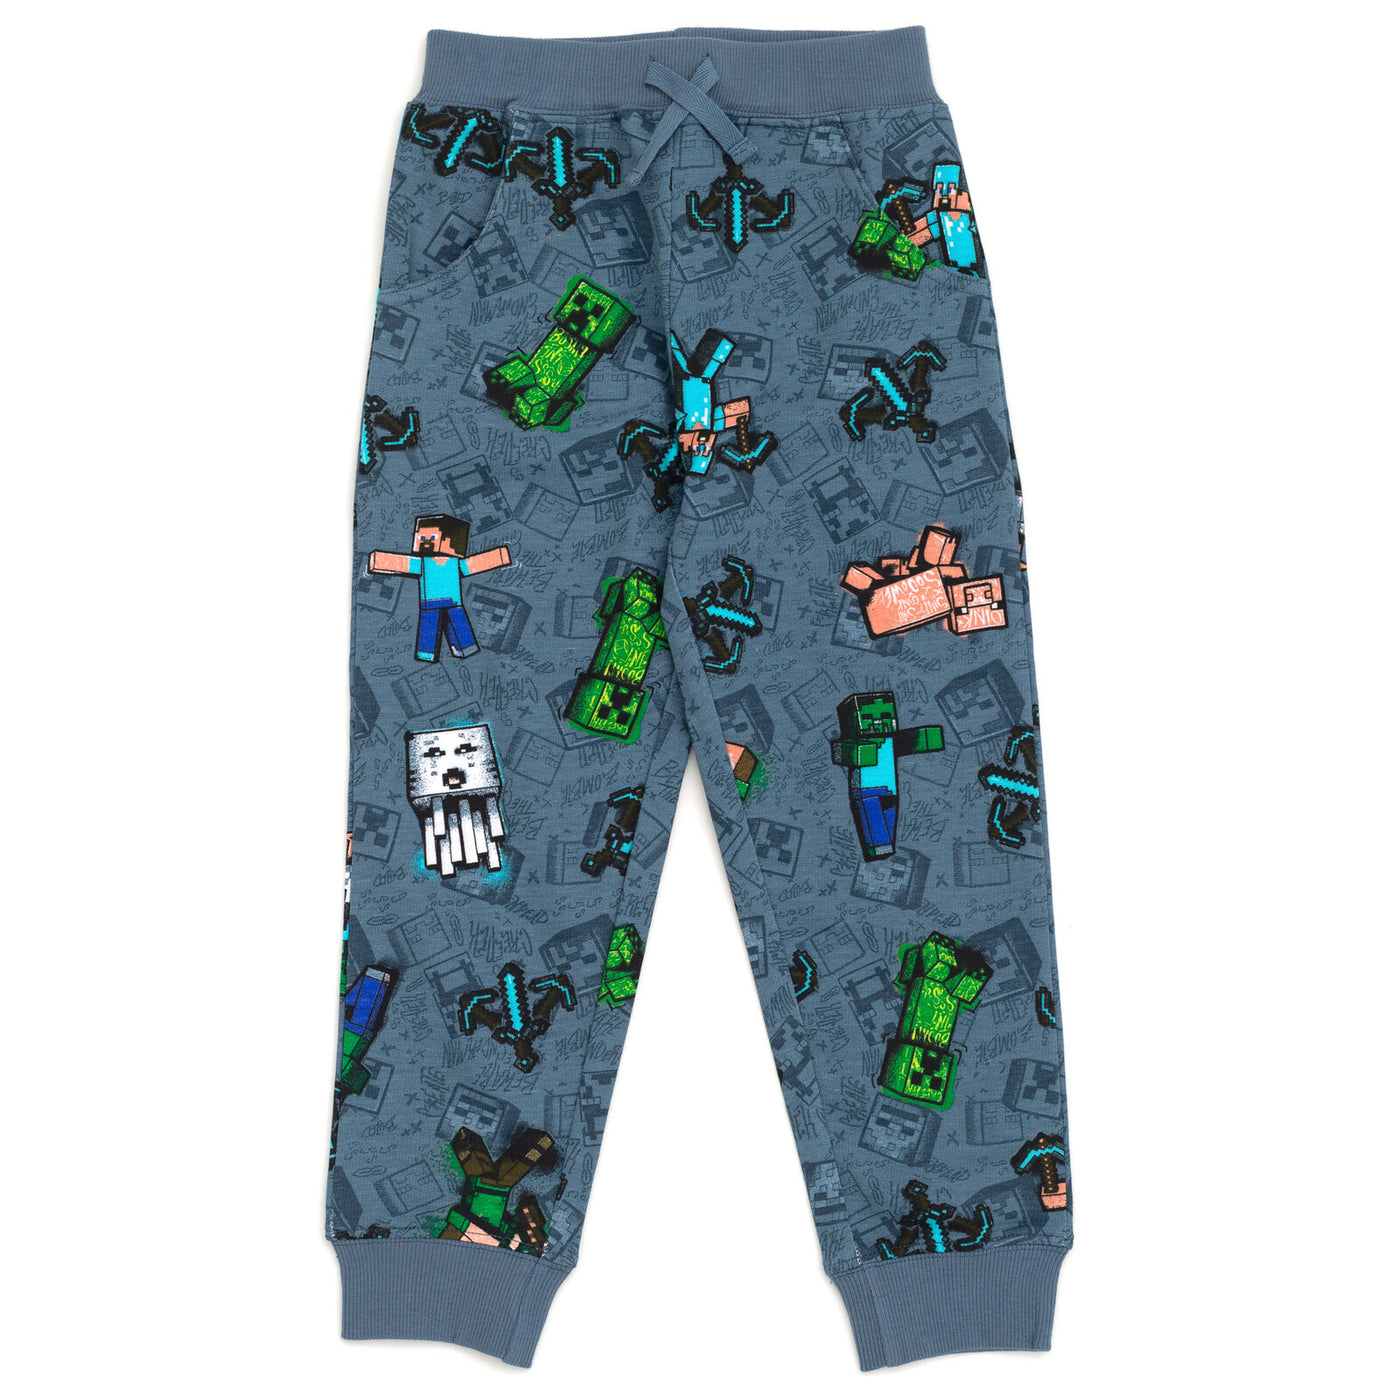 Minecraft French Terry Sweatshirt and Jogger Pants Set